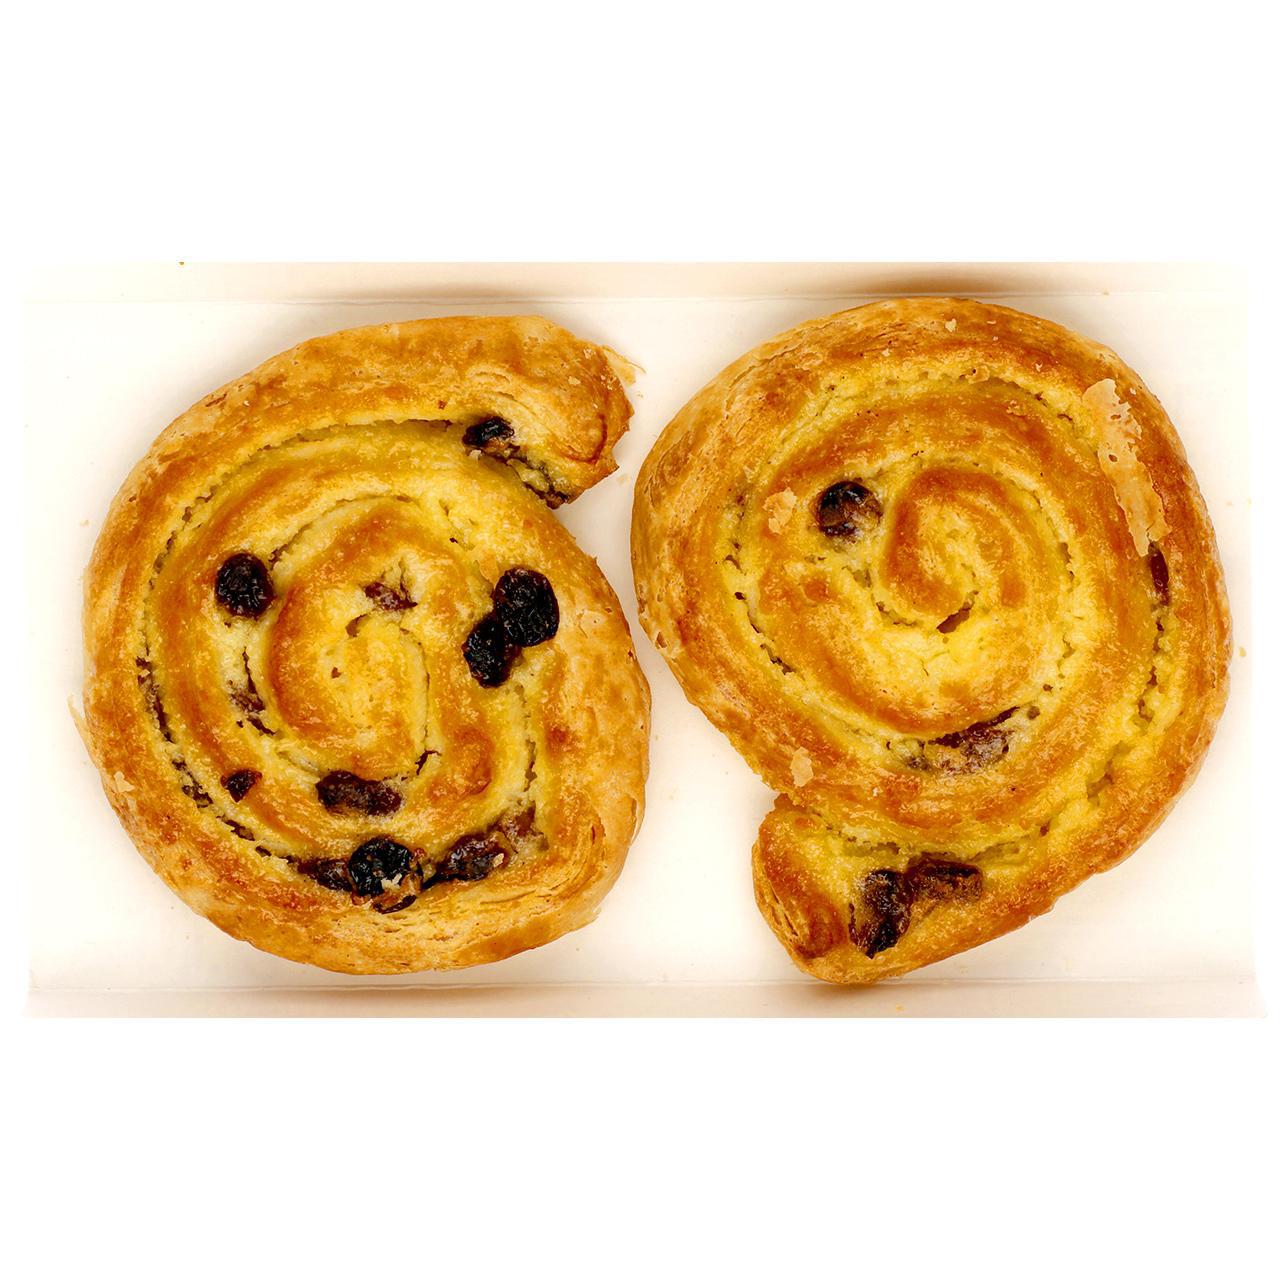 M&S Made Without Gluten Pain Aux Raisins 2 per pack